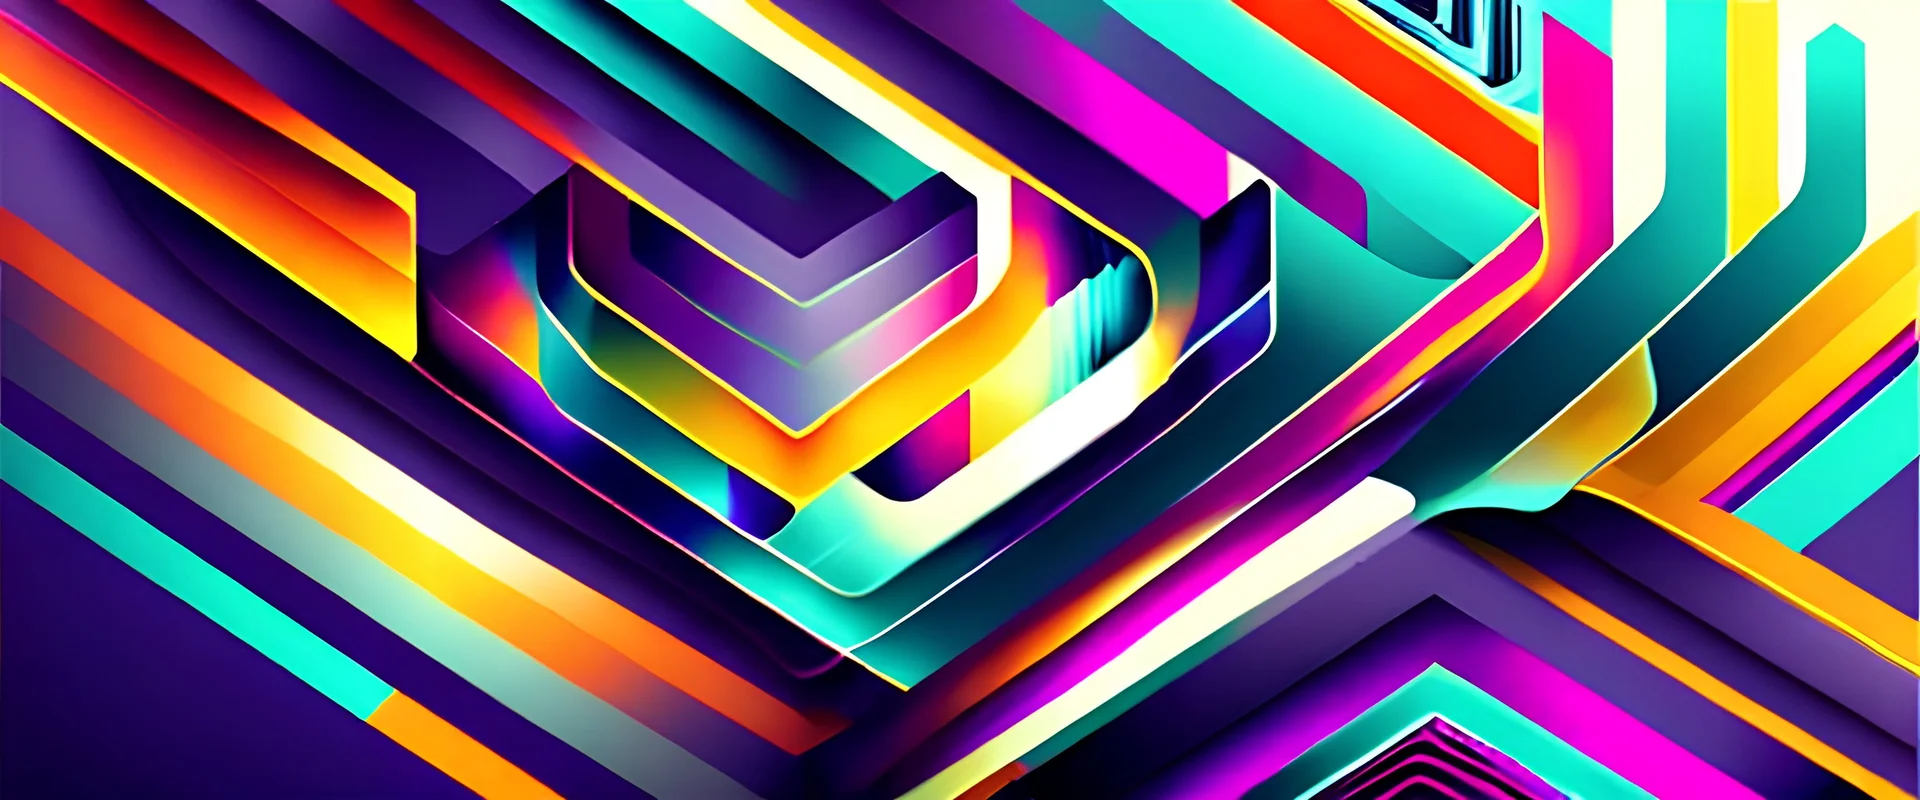 Creative abstract background